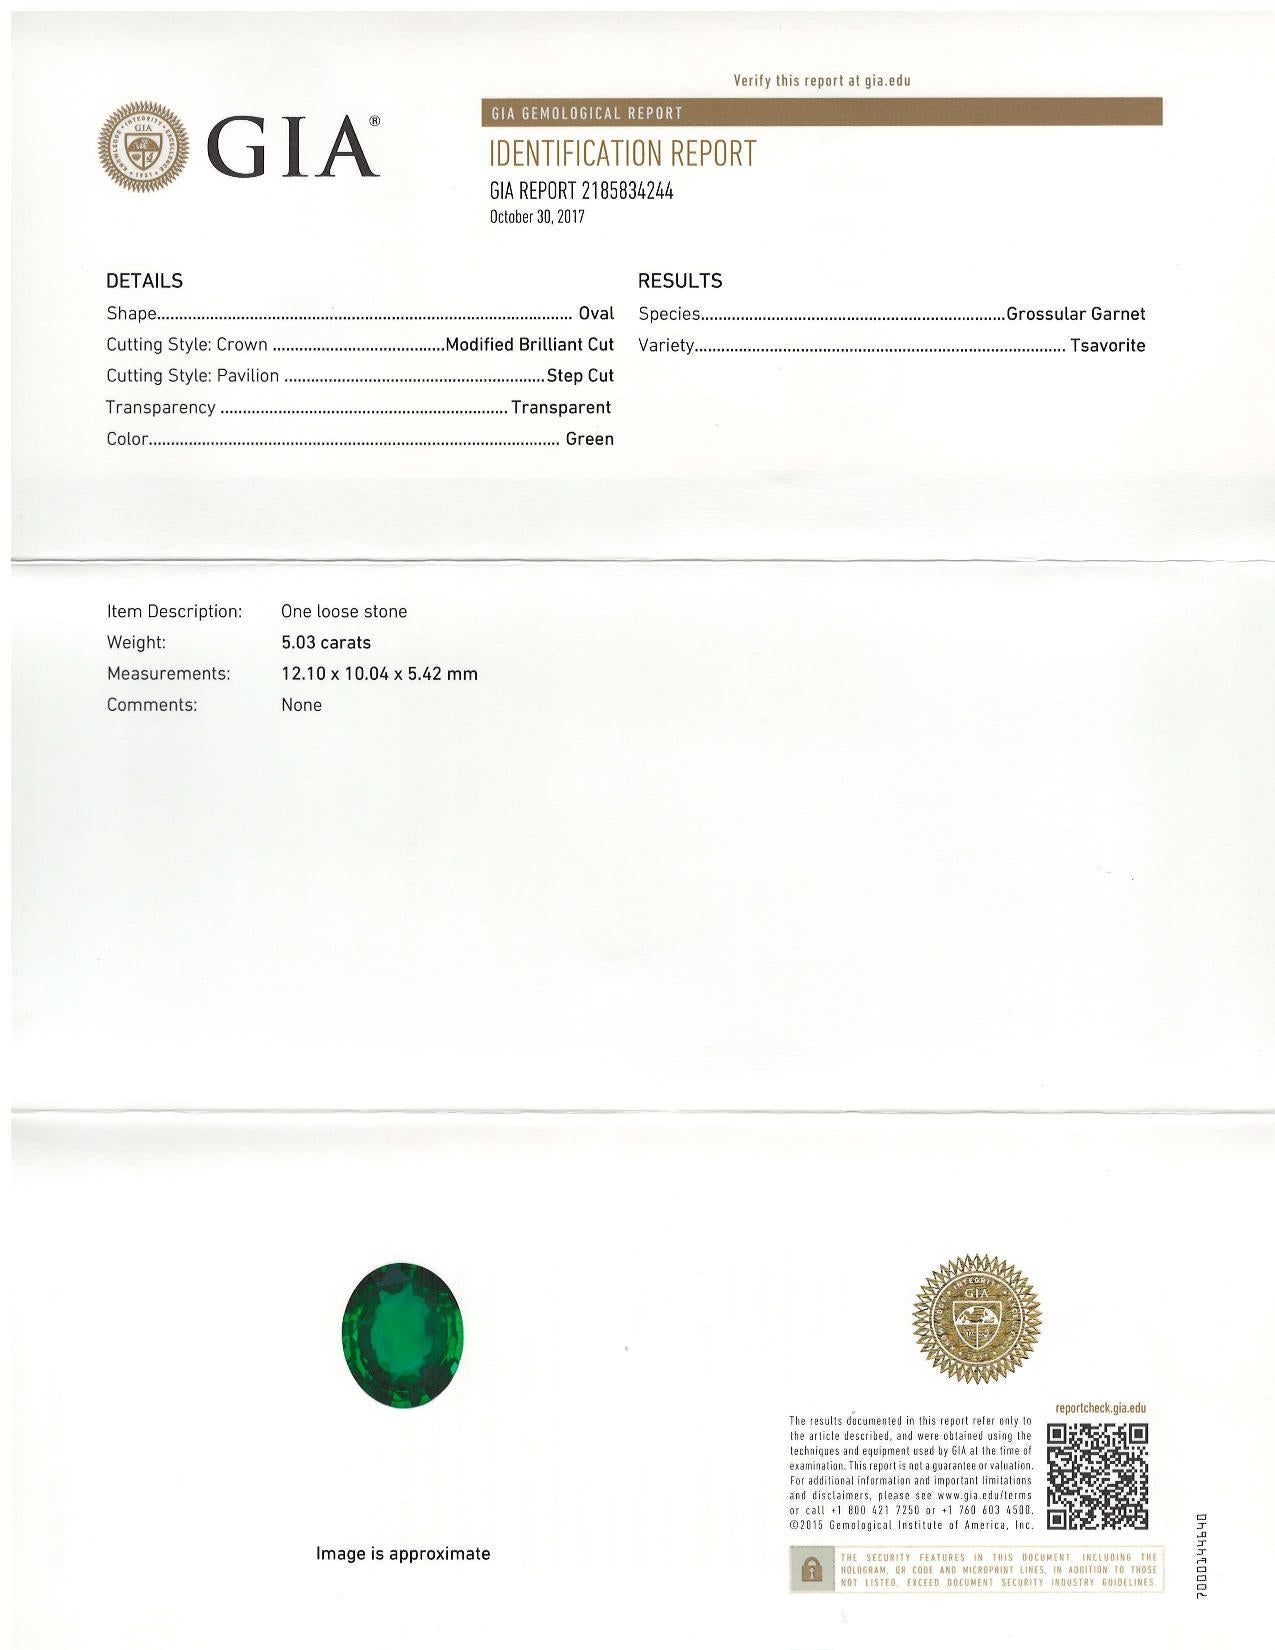 This beautifully intense, bright green tsavorite garnet weighs 5.03 carats and measures 12.10 x 10.04 x 5.42 millimeters, making it the perfect size for an impressive ring or pendant! It is a highly saturated pure green color with no secondary